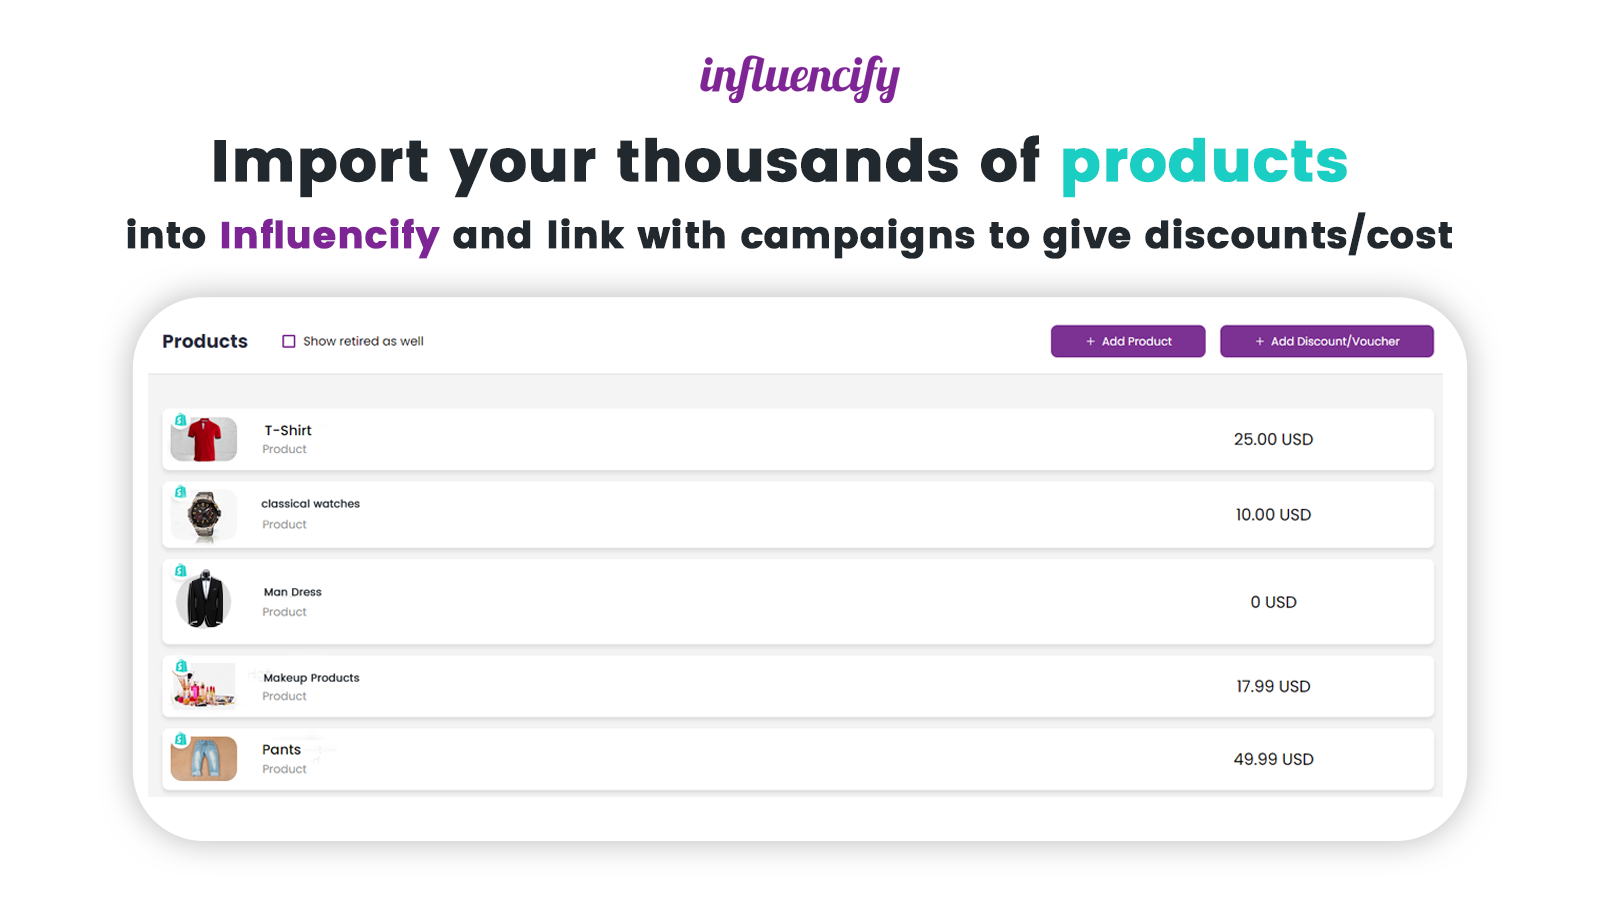 Import your products and link with campaigns to give benefits